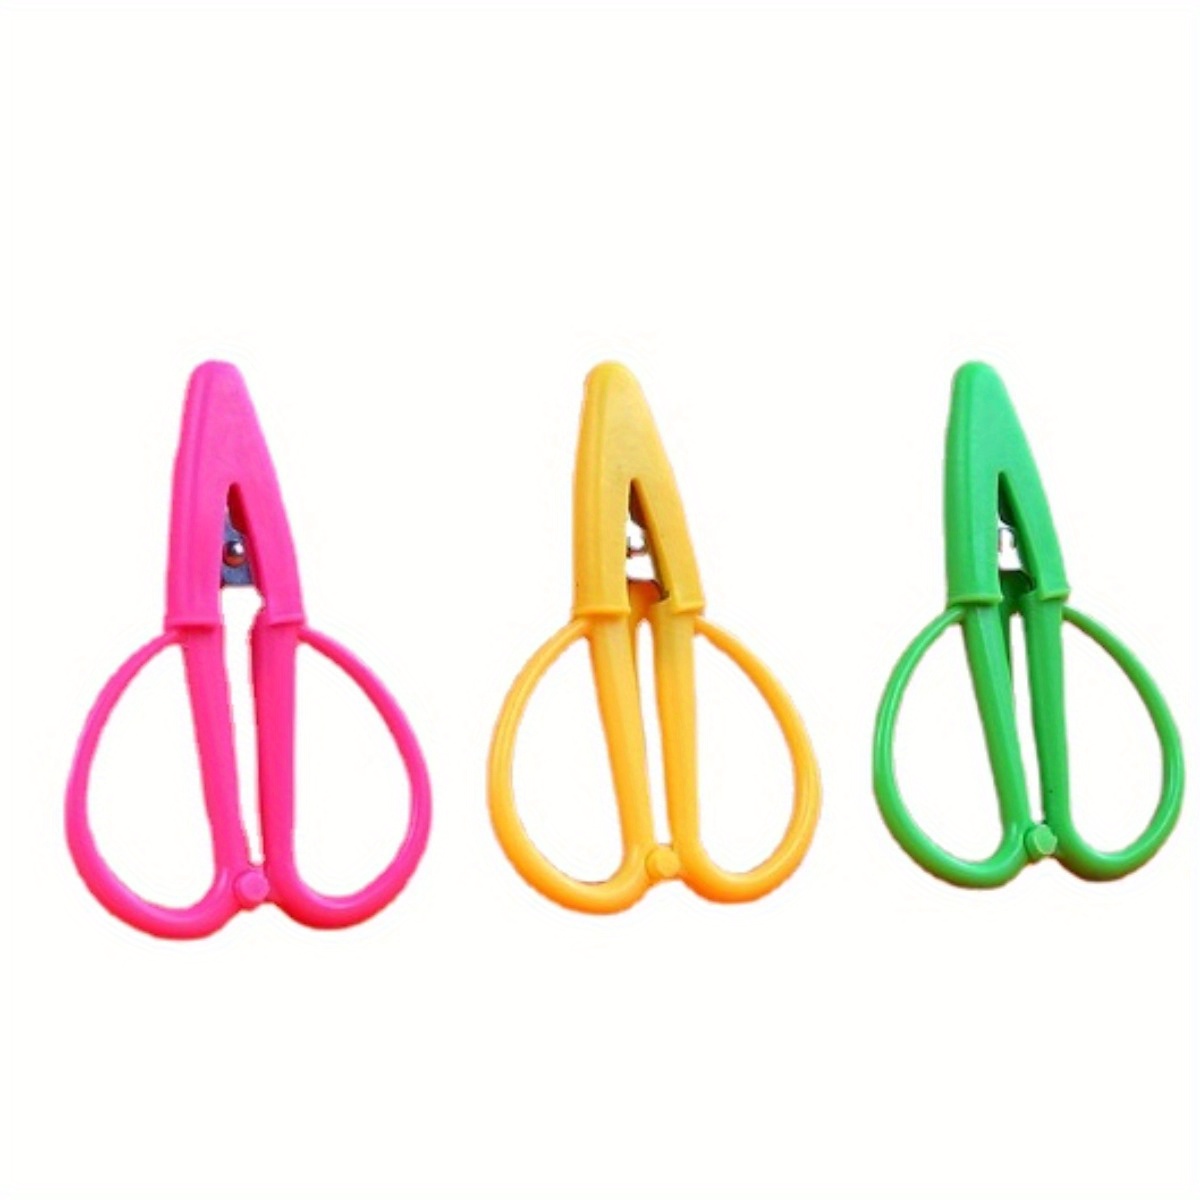  Mini Scissors Thread Tiny Scissors Colorful Travel Scissors  Back to School Sewing Small Scissors 2.56 x 1.65 Inch Embroidery Craft  Scissors with Cover, 3 Colors (24 Pcs)